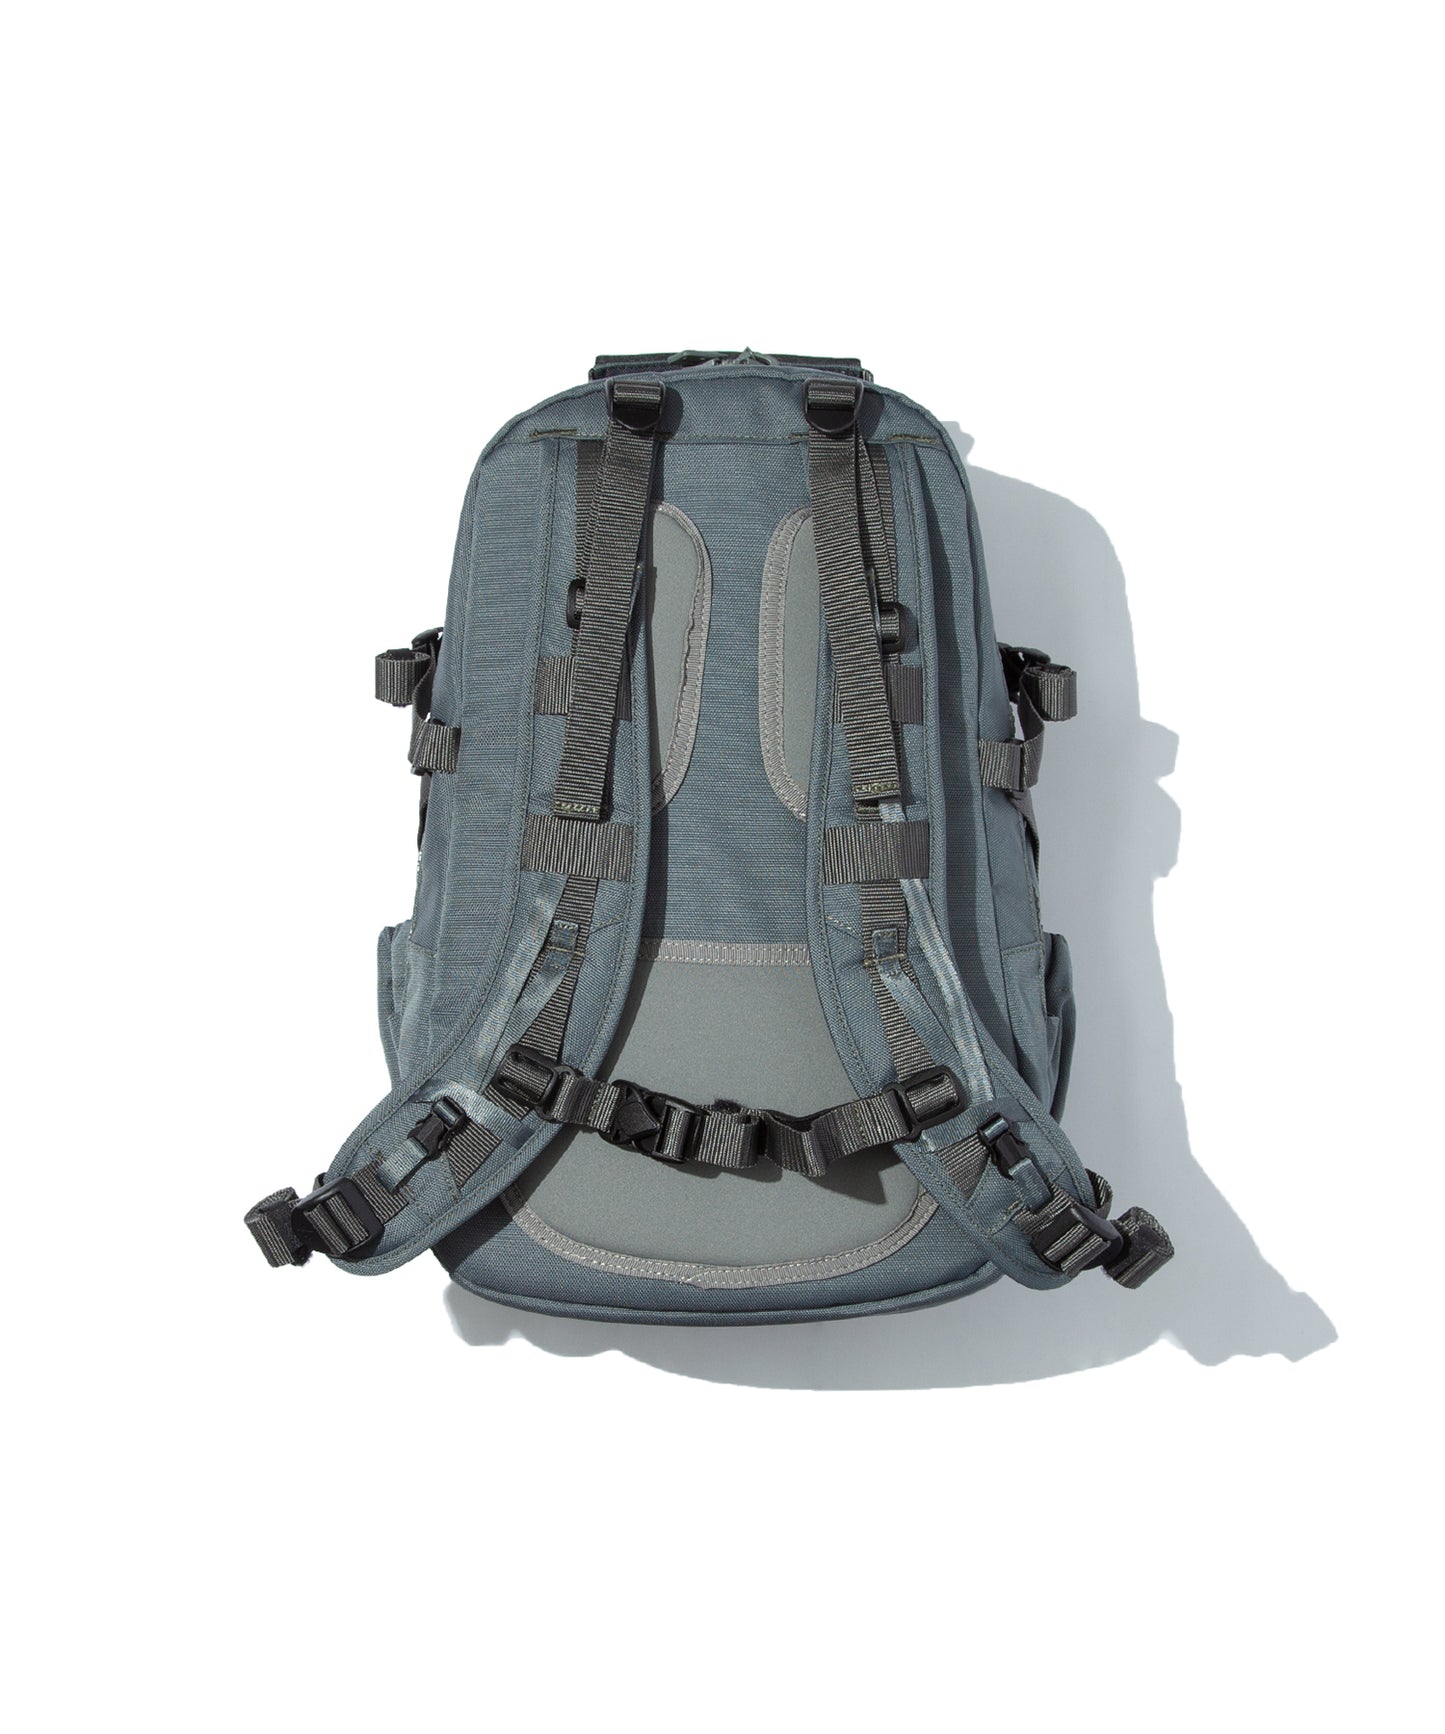 F/CE. 950 TRAVEL BACKPACK S